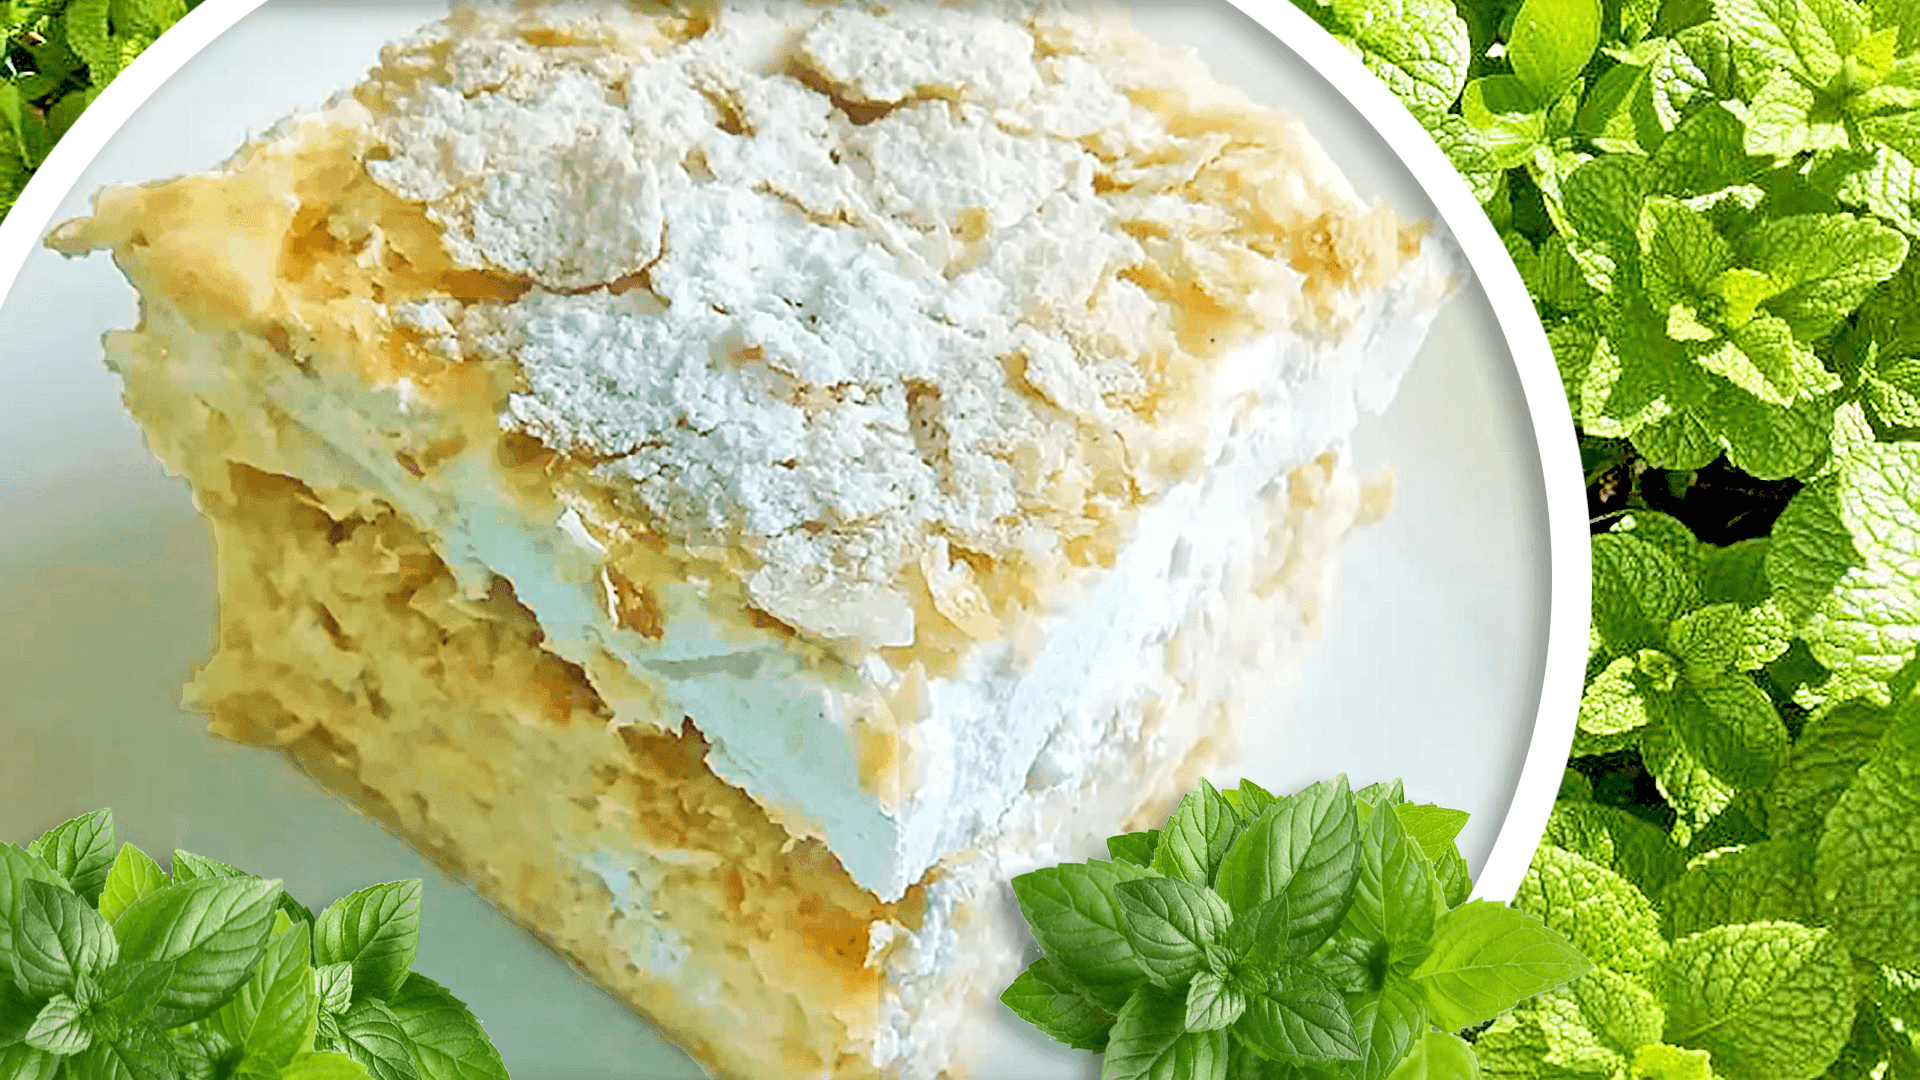 Homemade Cremeschnitte Recipe for French Vanilla Slice with Whipped Cream